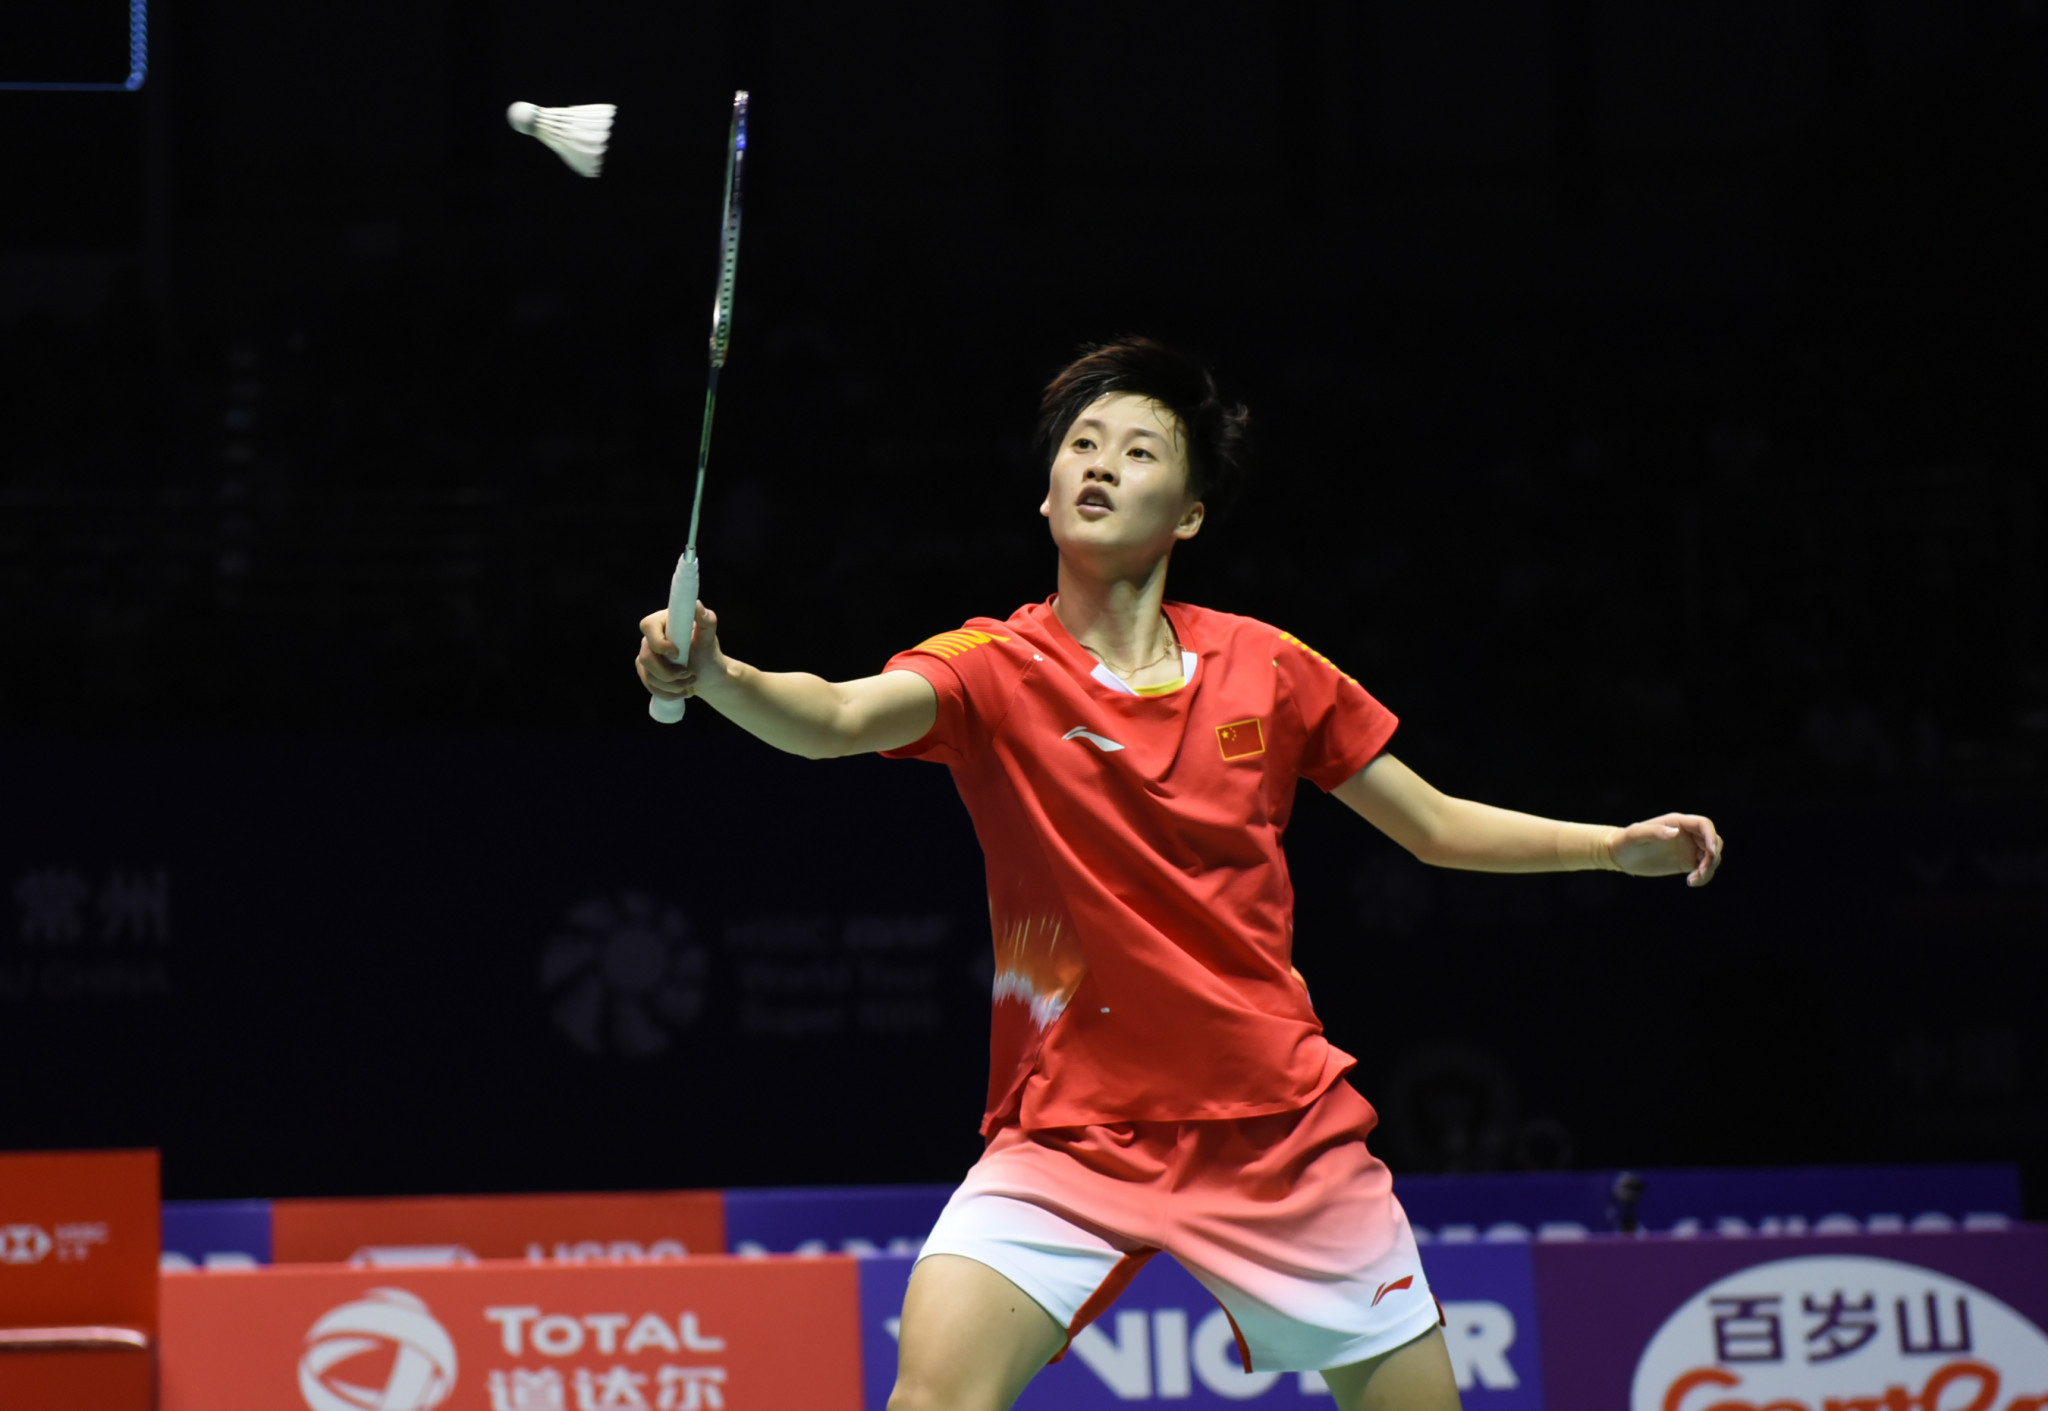 China's Chen Yufei beat Japan's Sayaka Sato to reach the second round of the BWF Fuzhou China Open today ©Getty Images